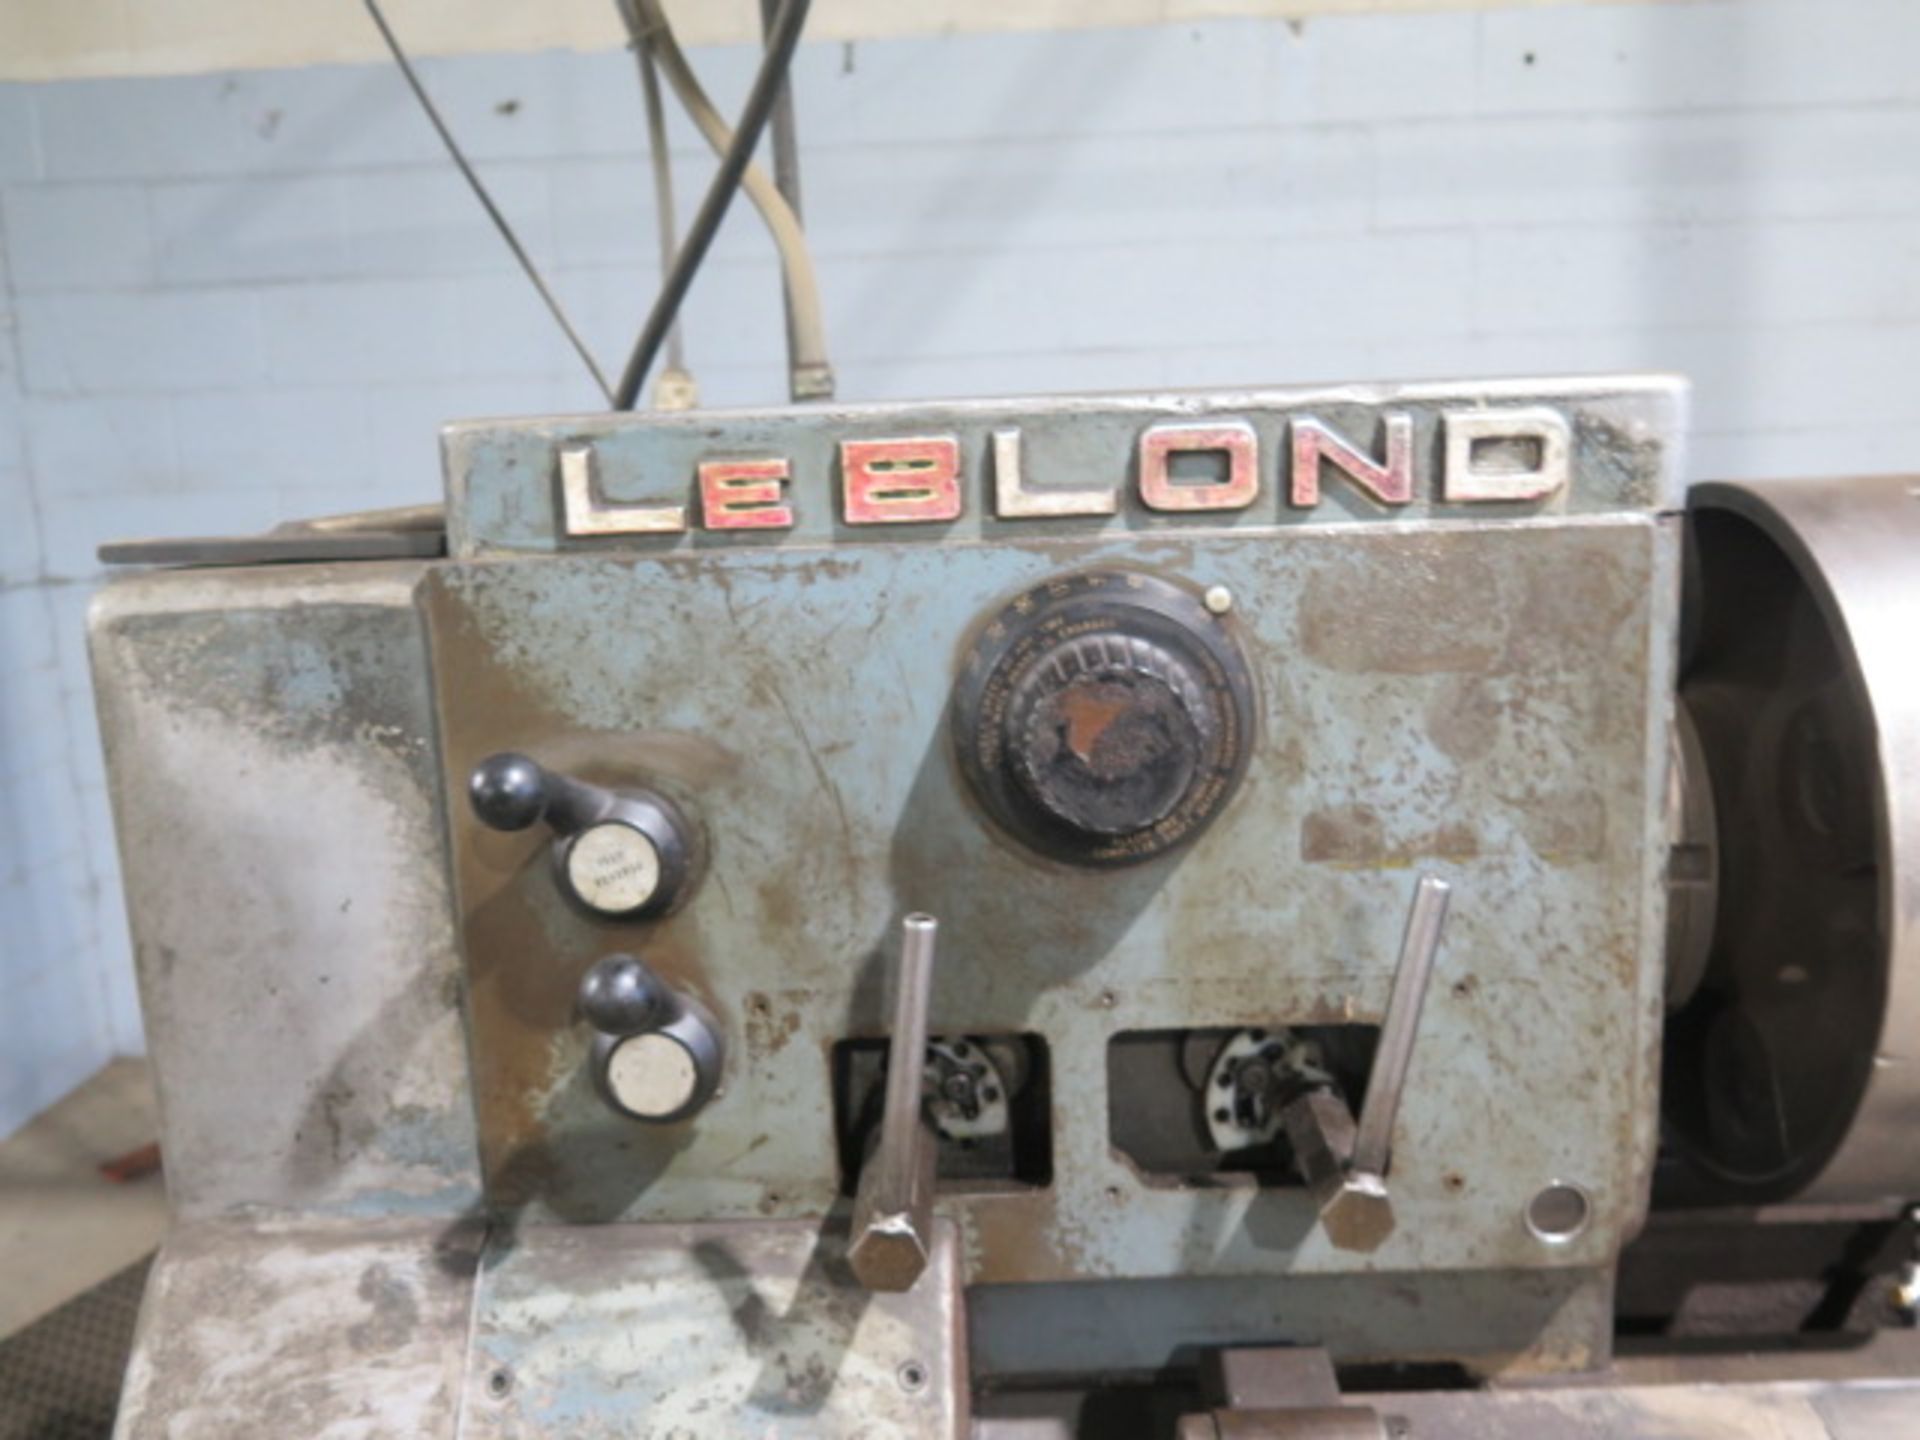 LeBlond 19” x 106” Lathe w/ 25-1000 Dial Change RPM, Inch Threading, Tailstock, (2) Steady Rests, - Image 5 of 11